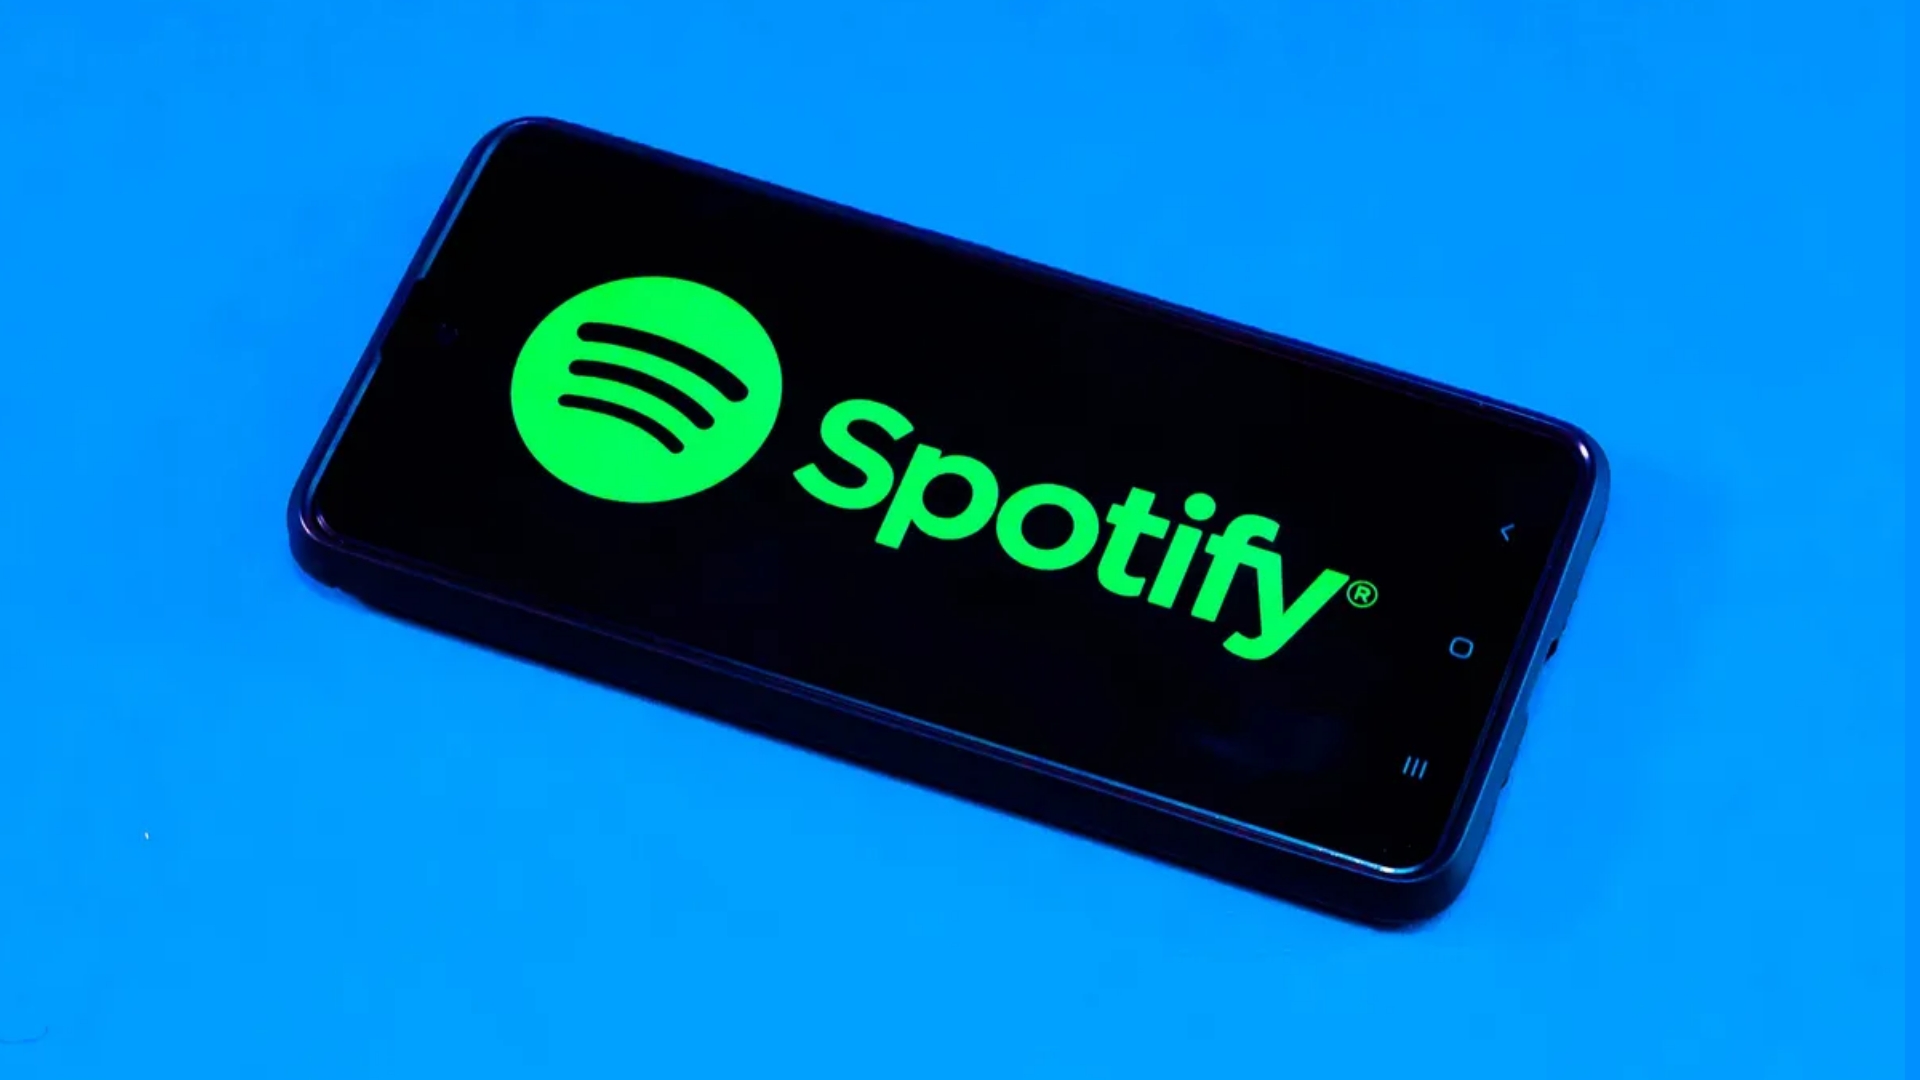 Several markets now charge more for Spotify Premium.